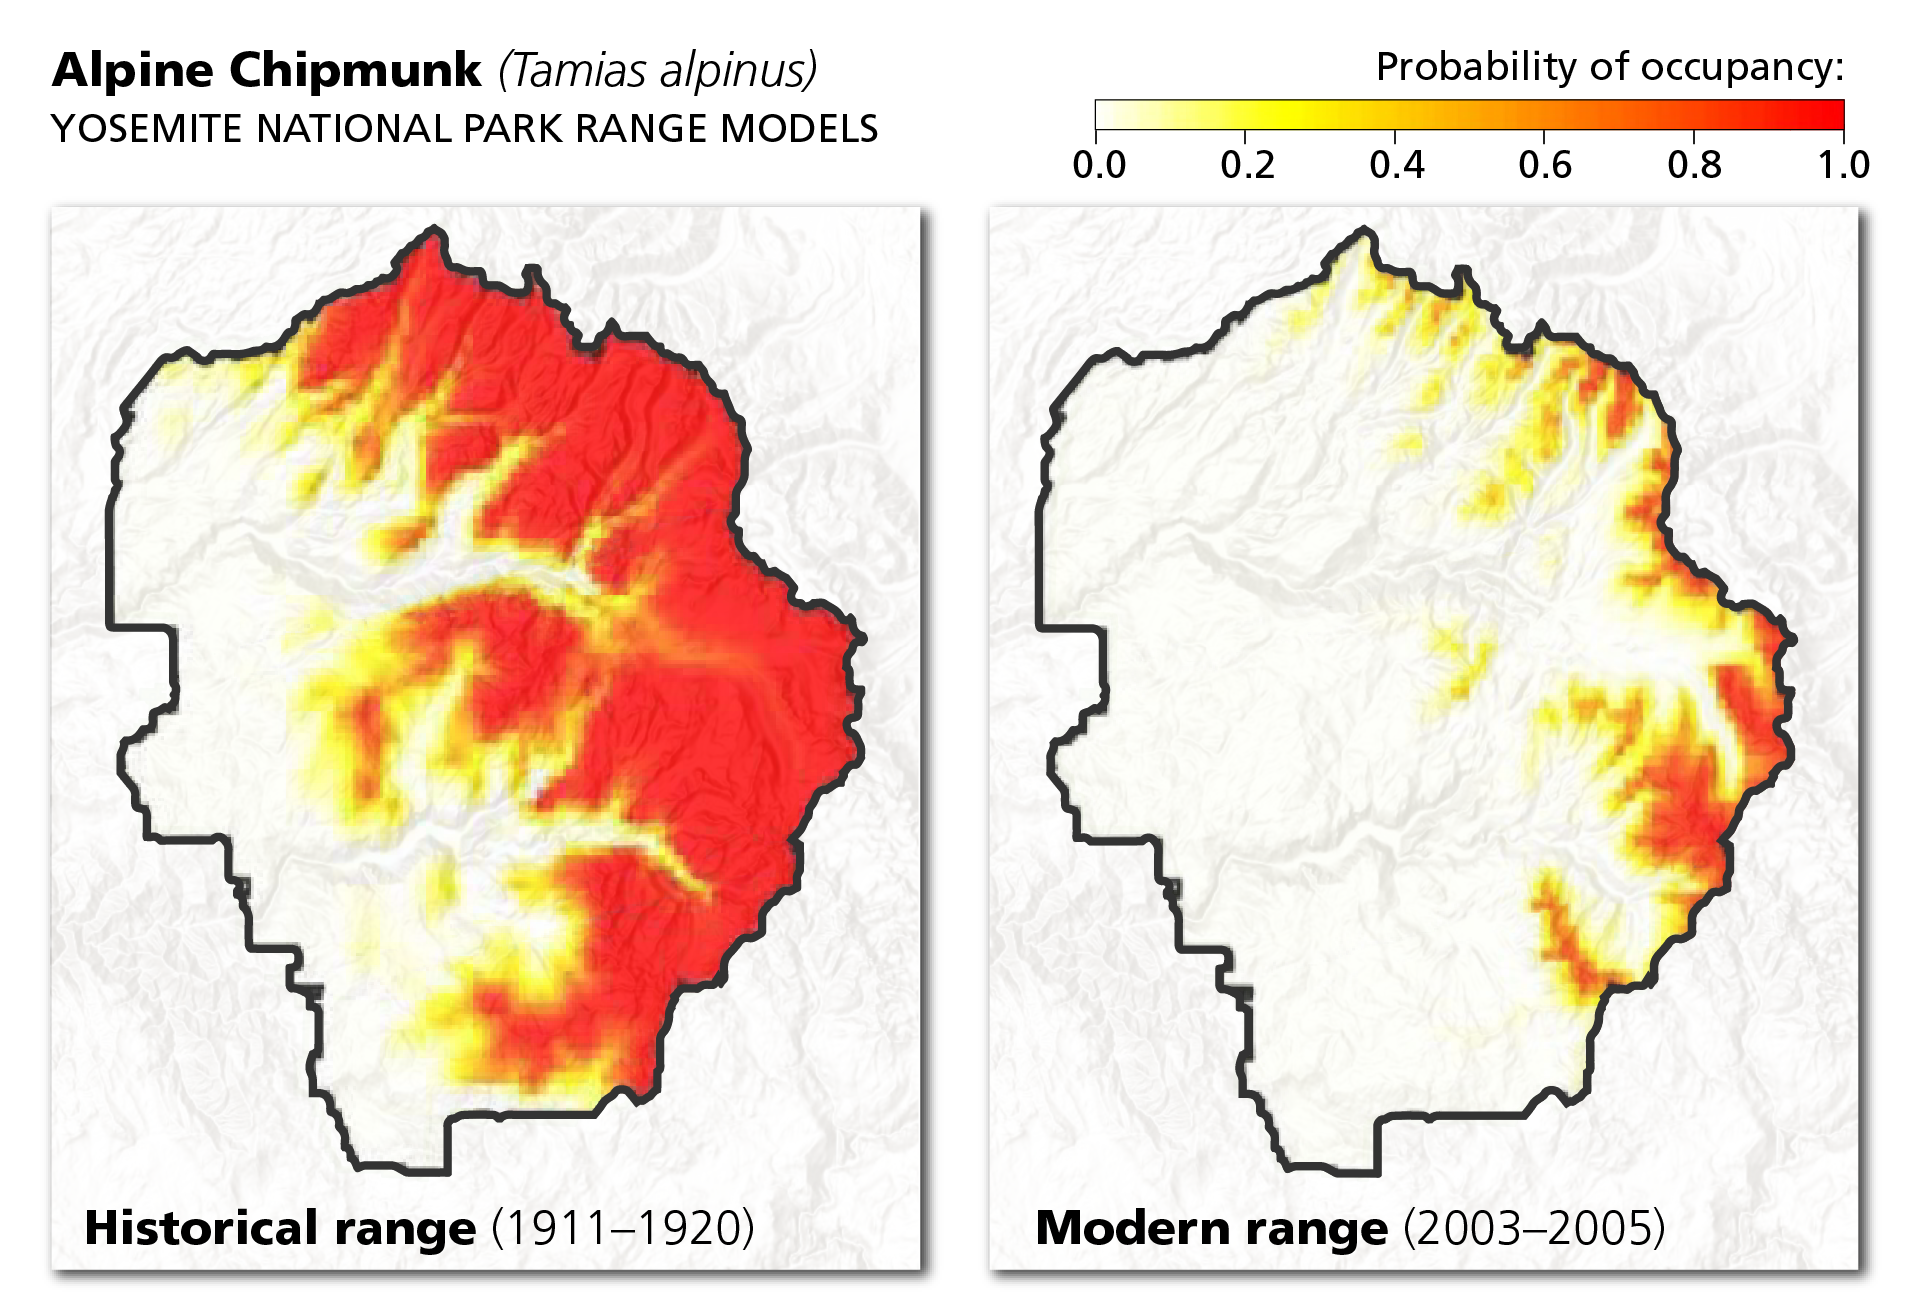 Two maps show historic and modern range of the alpine chipmunk. Modern range is much smaller than historic range, and limited to mountaintops.